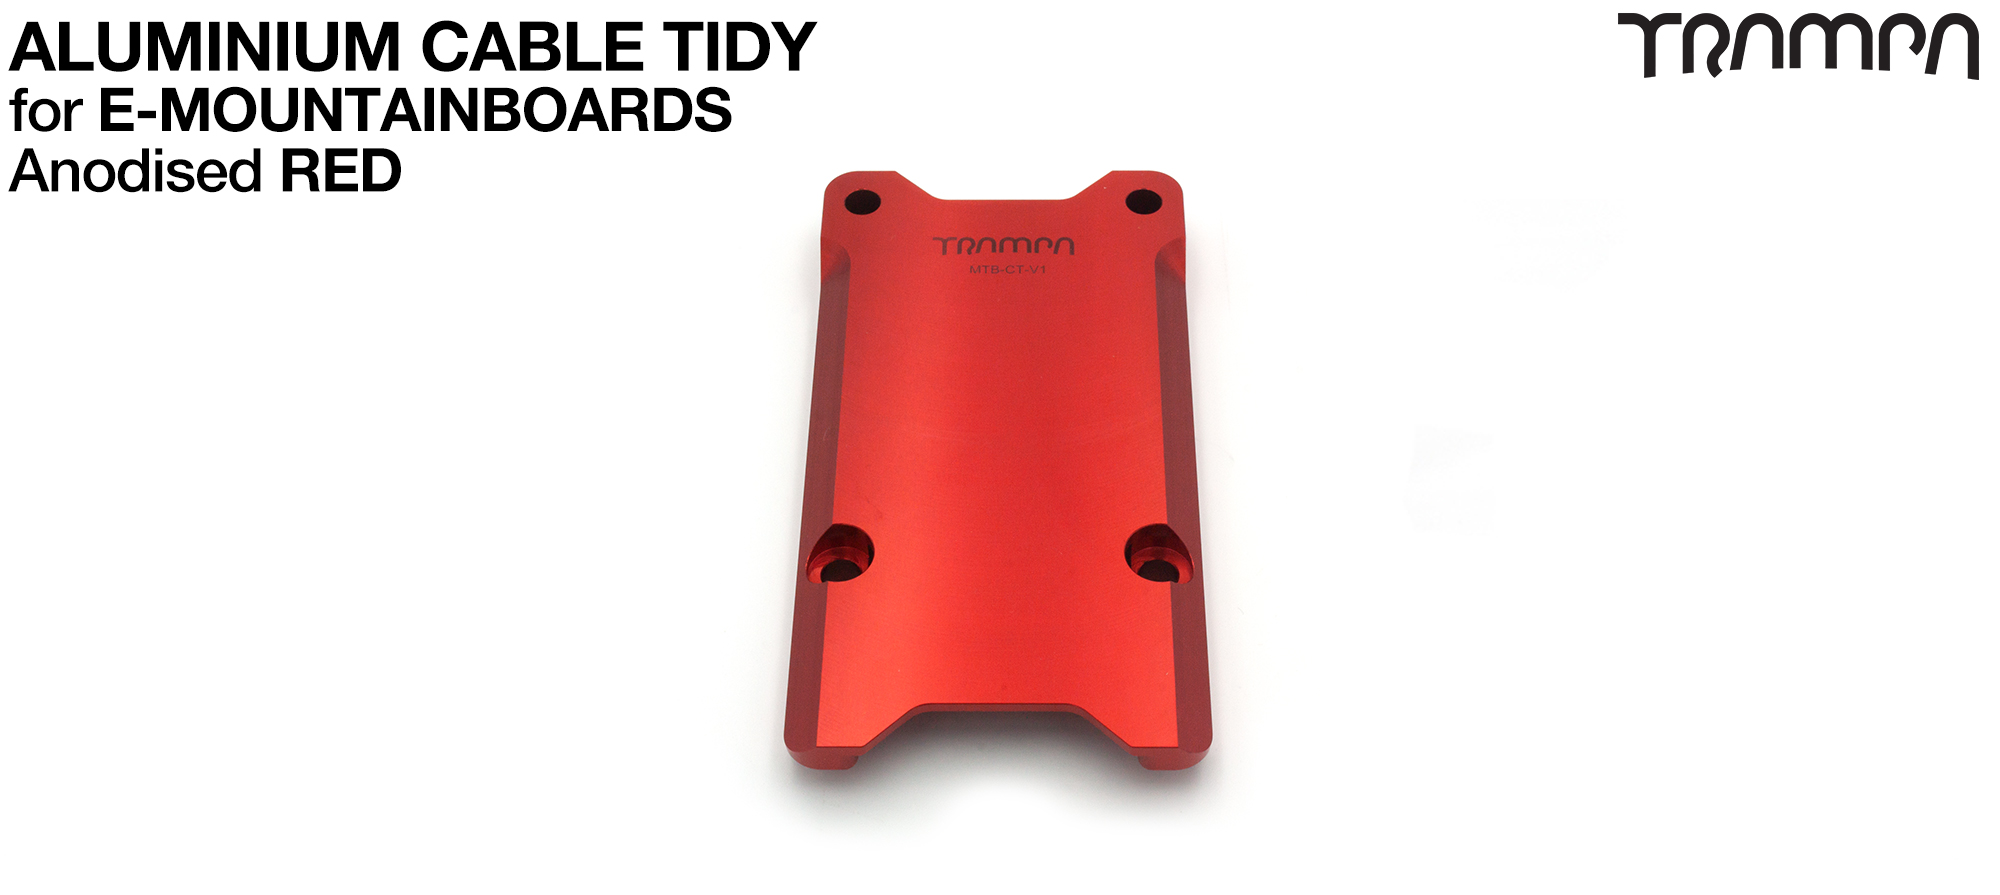 Anodised ALUMINIUM CABLE Router - RED